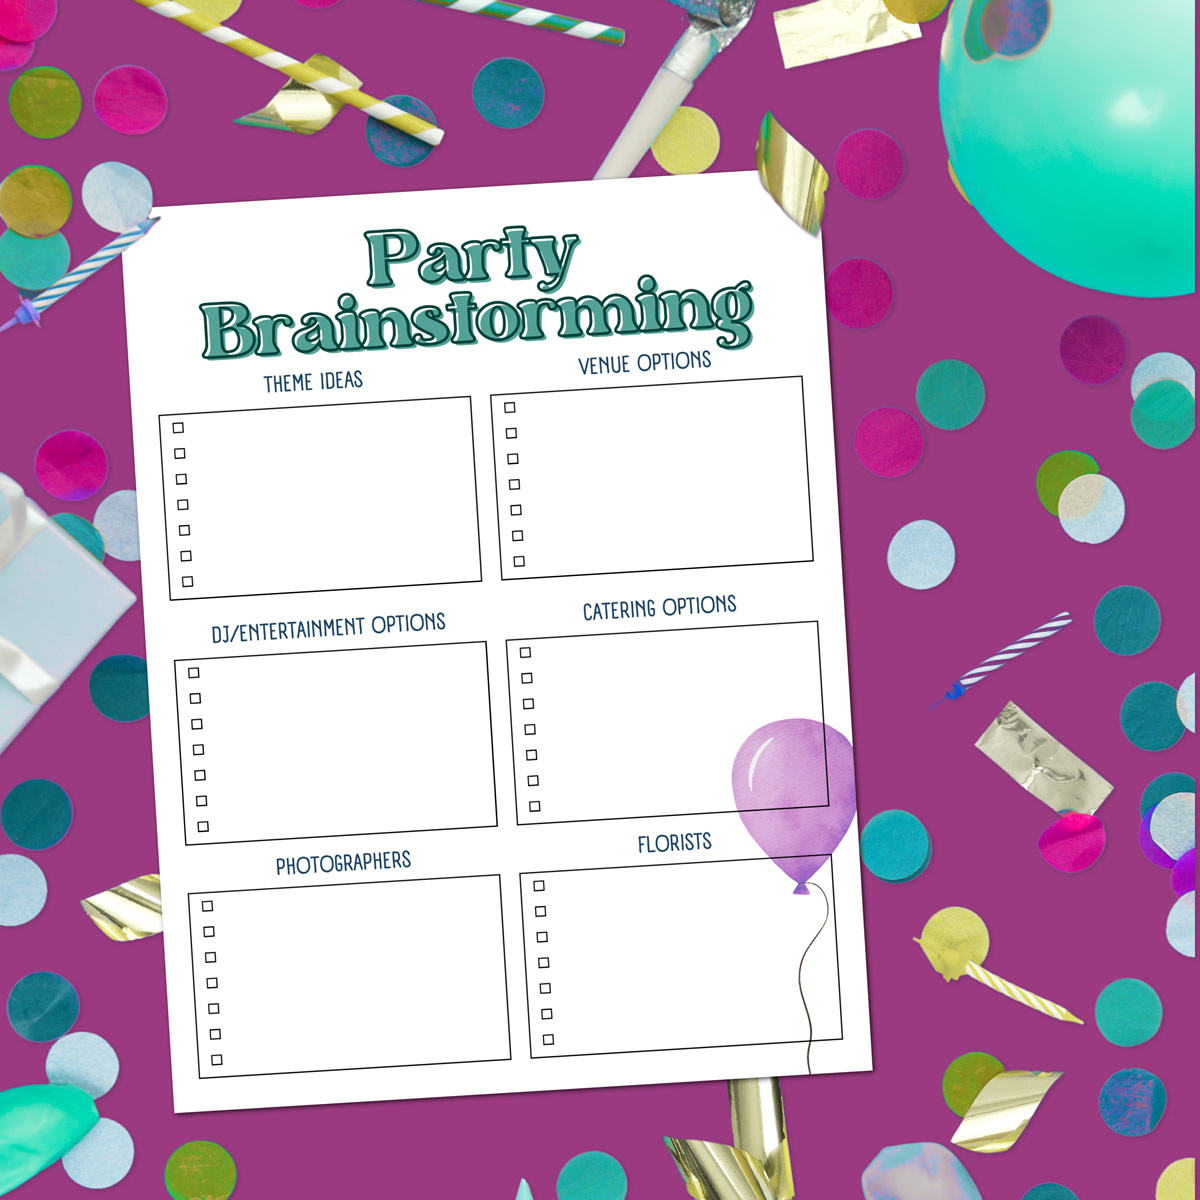 A party brainstorming printable on a purple background surrounded by confetti.